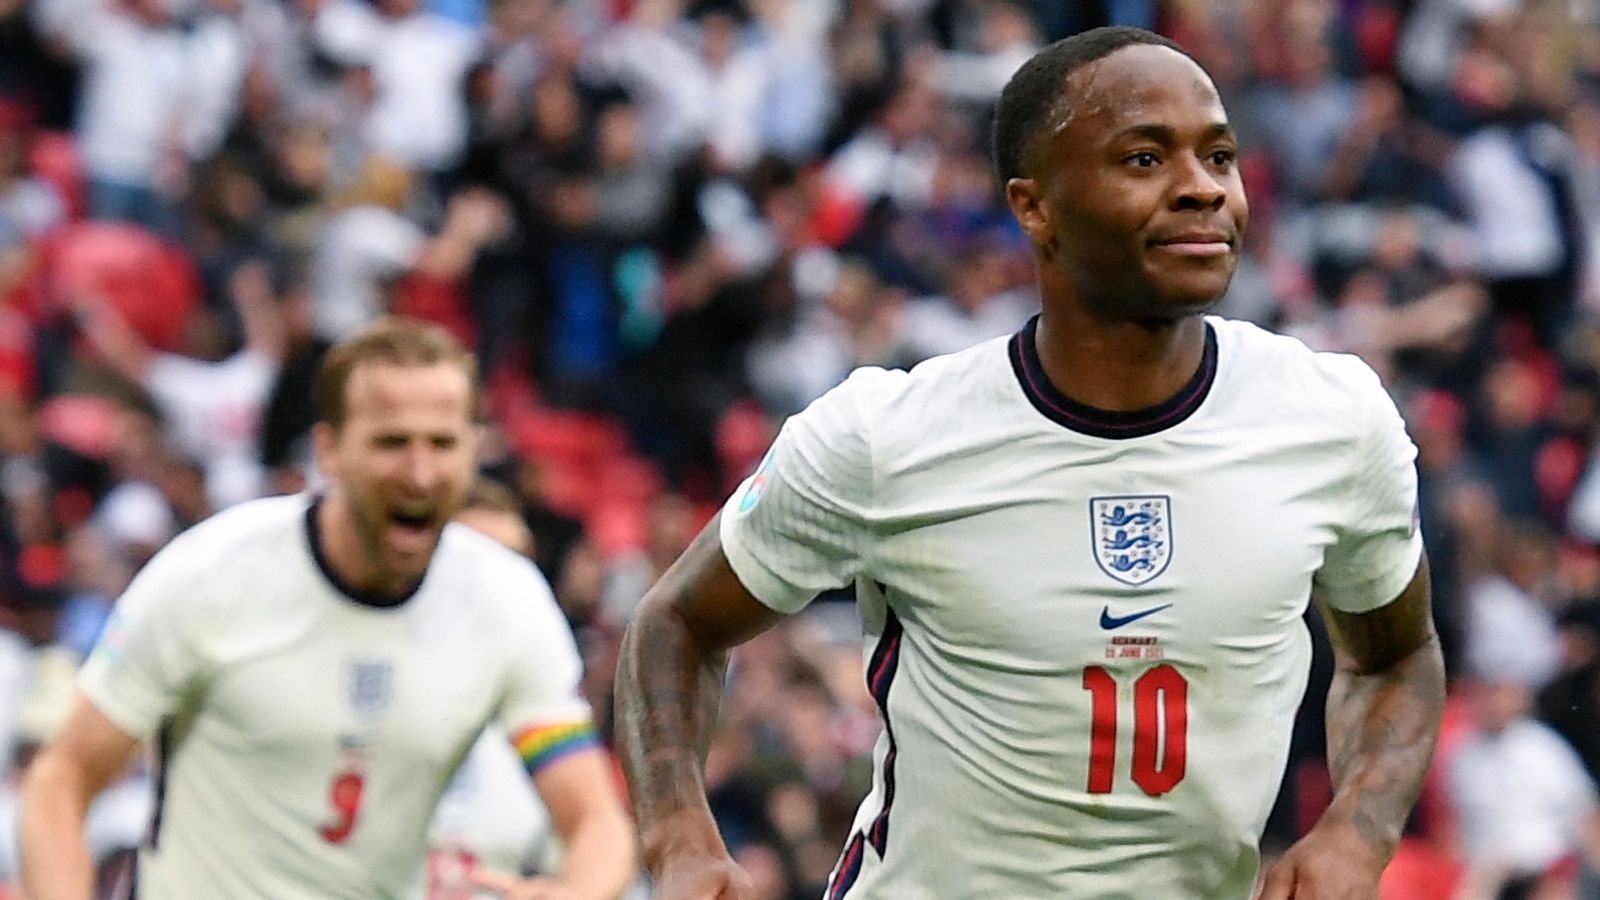 England 2-0 Germany: Player ratings from Euro 2020 Wembley clash